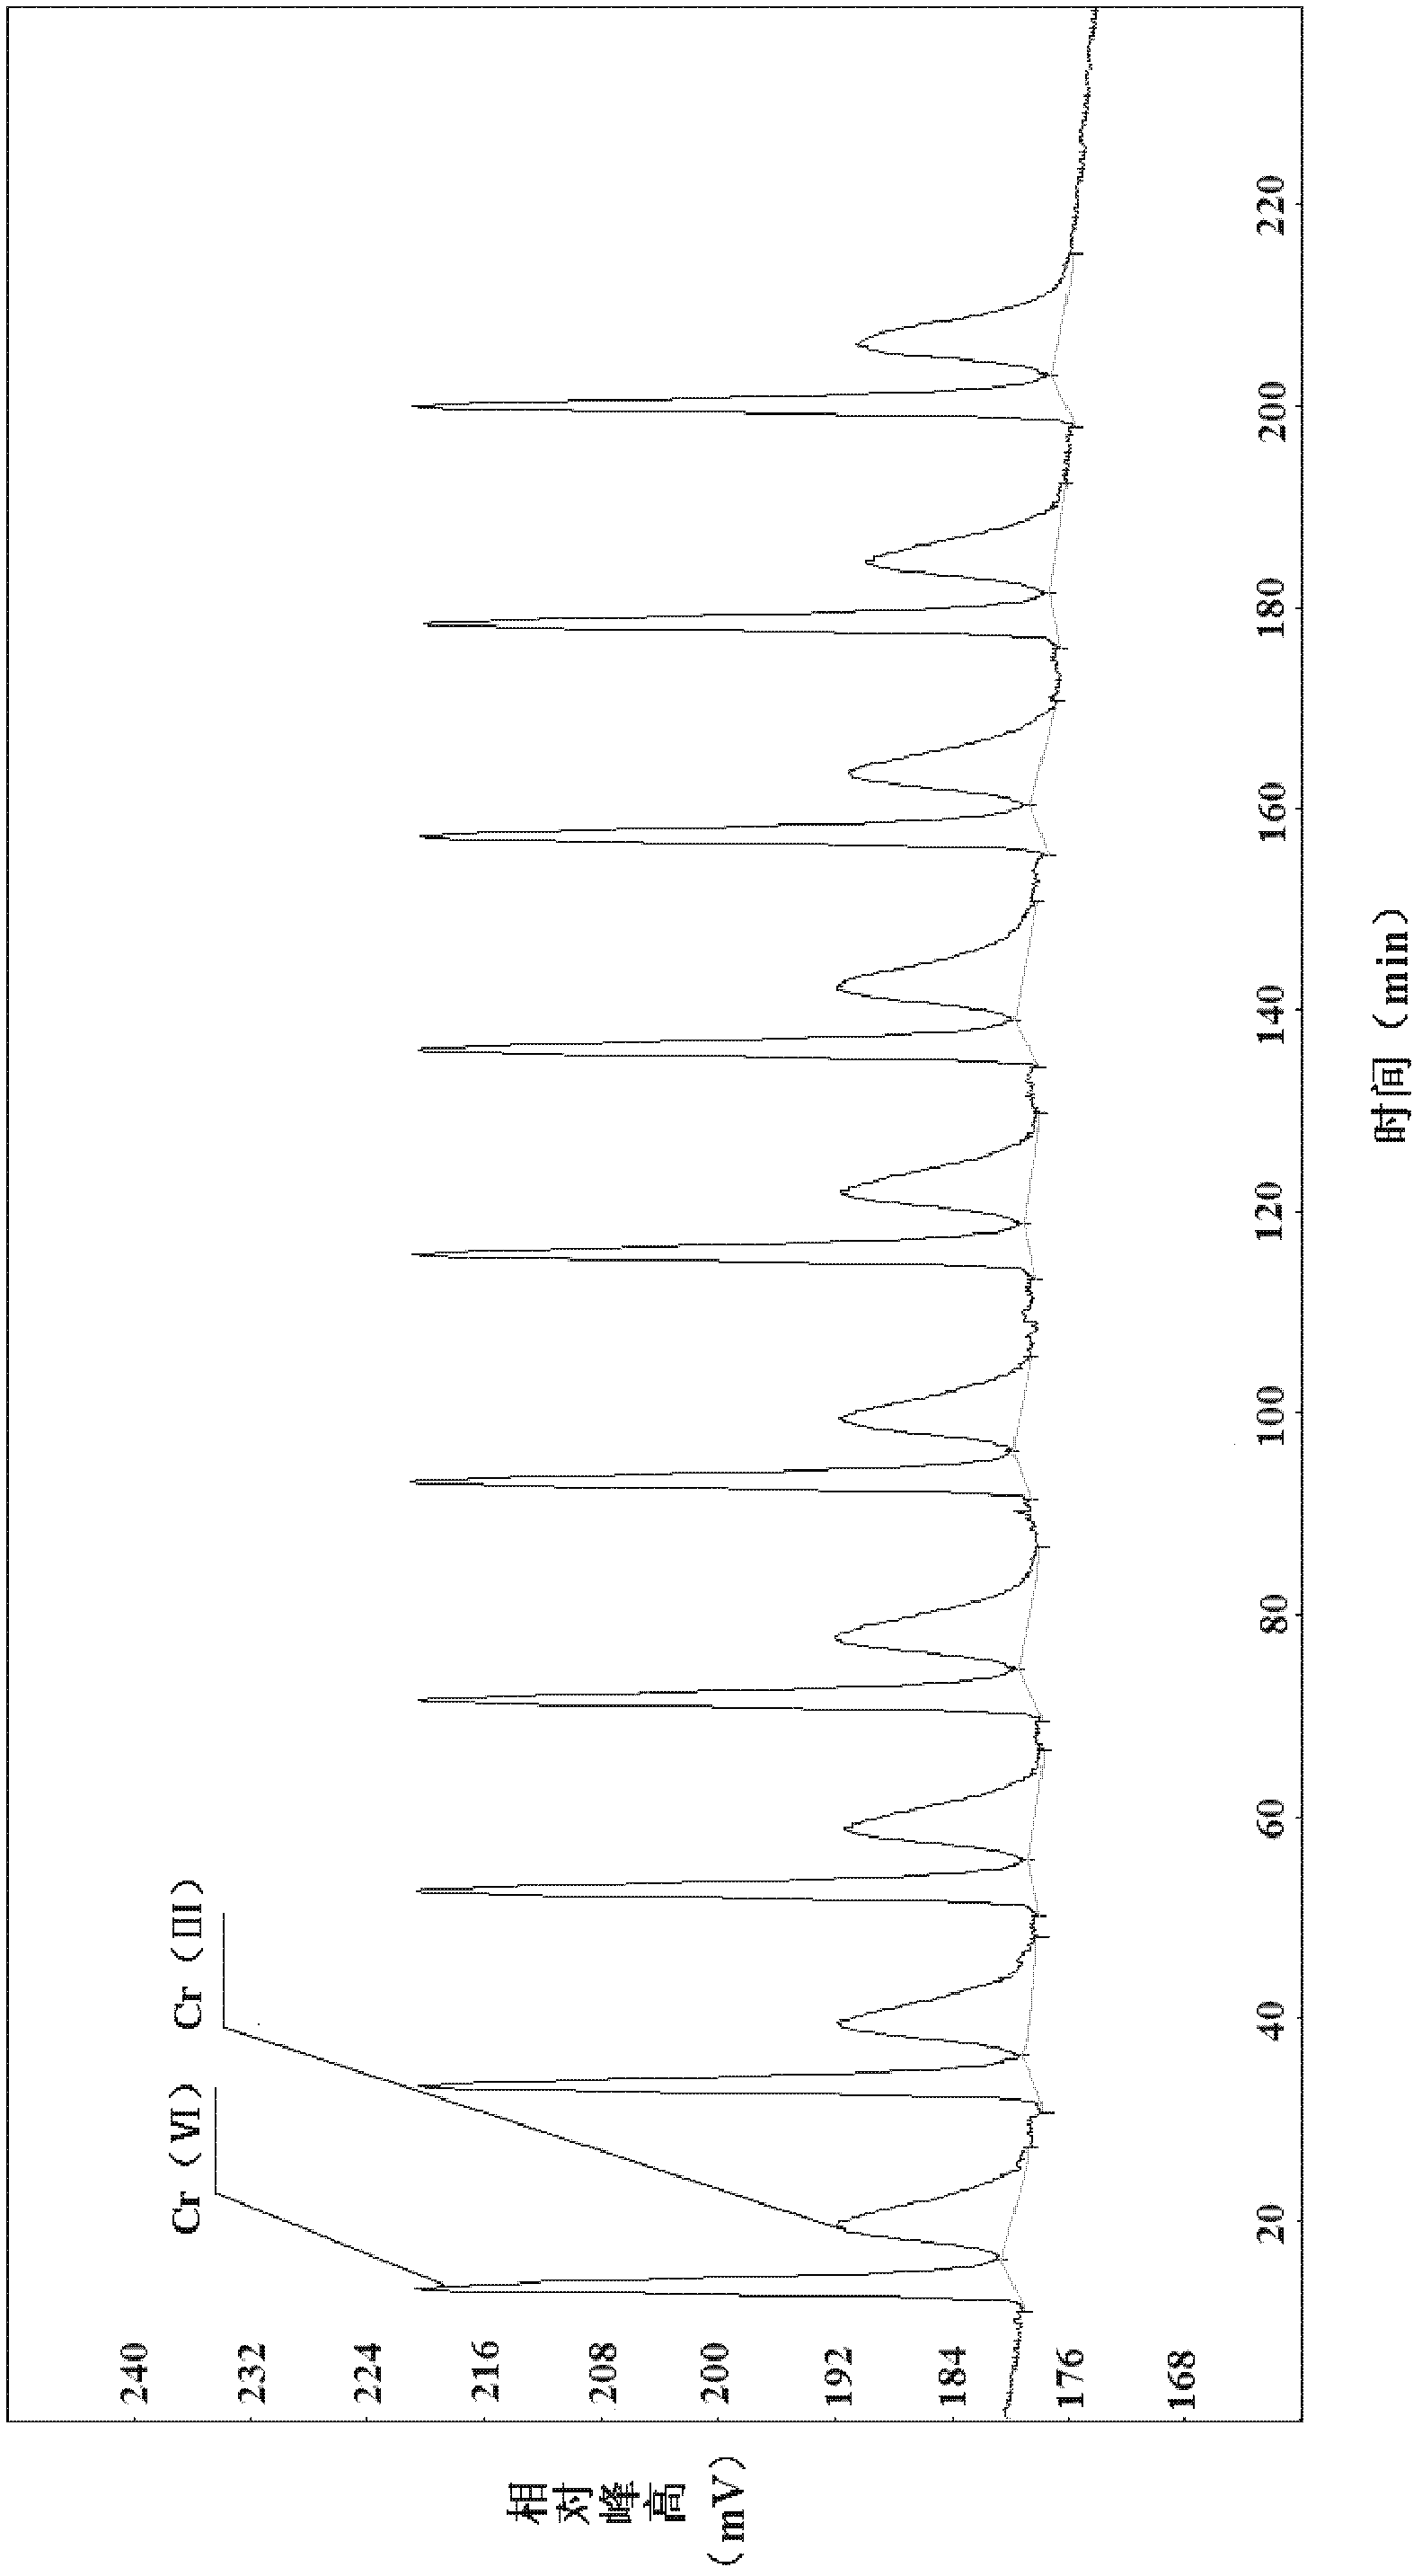 Method for detecting and analyzing trivalent chromium and hexavalent chromium in water sample simultaneously on line